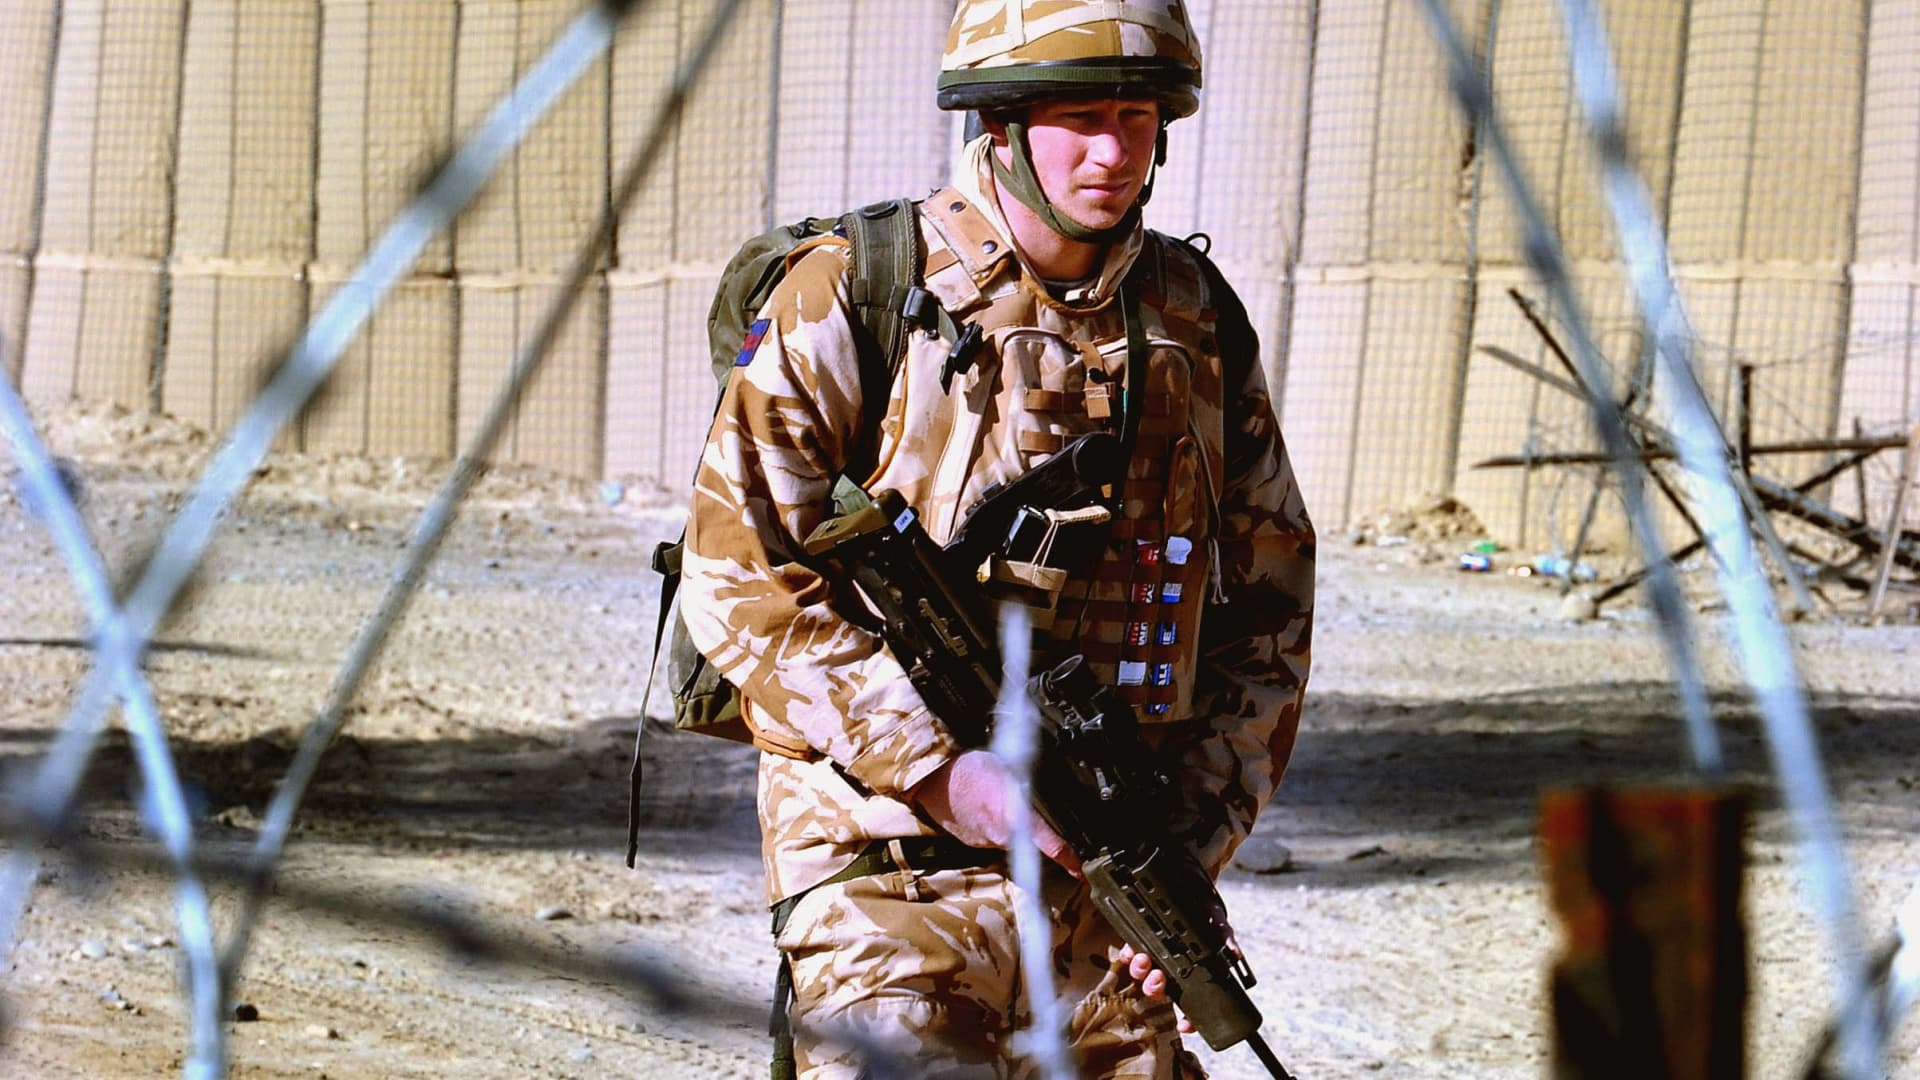 Prince Harry patrols the deserted town of Garmisir on January 2, 2008 in Helmand Province, Afghanistan.